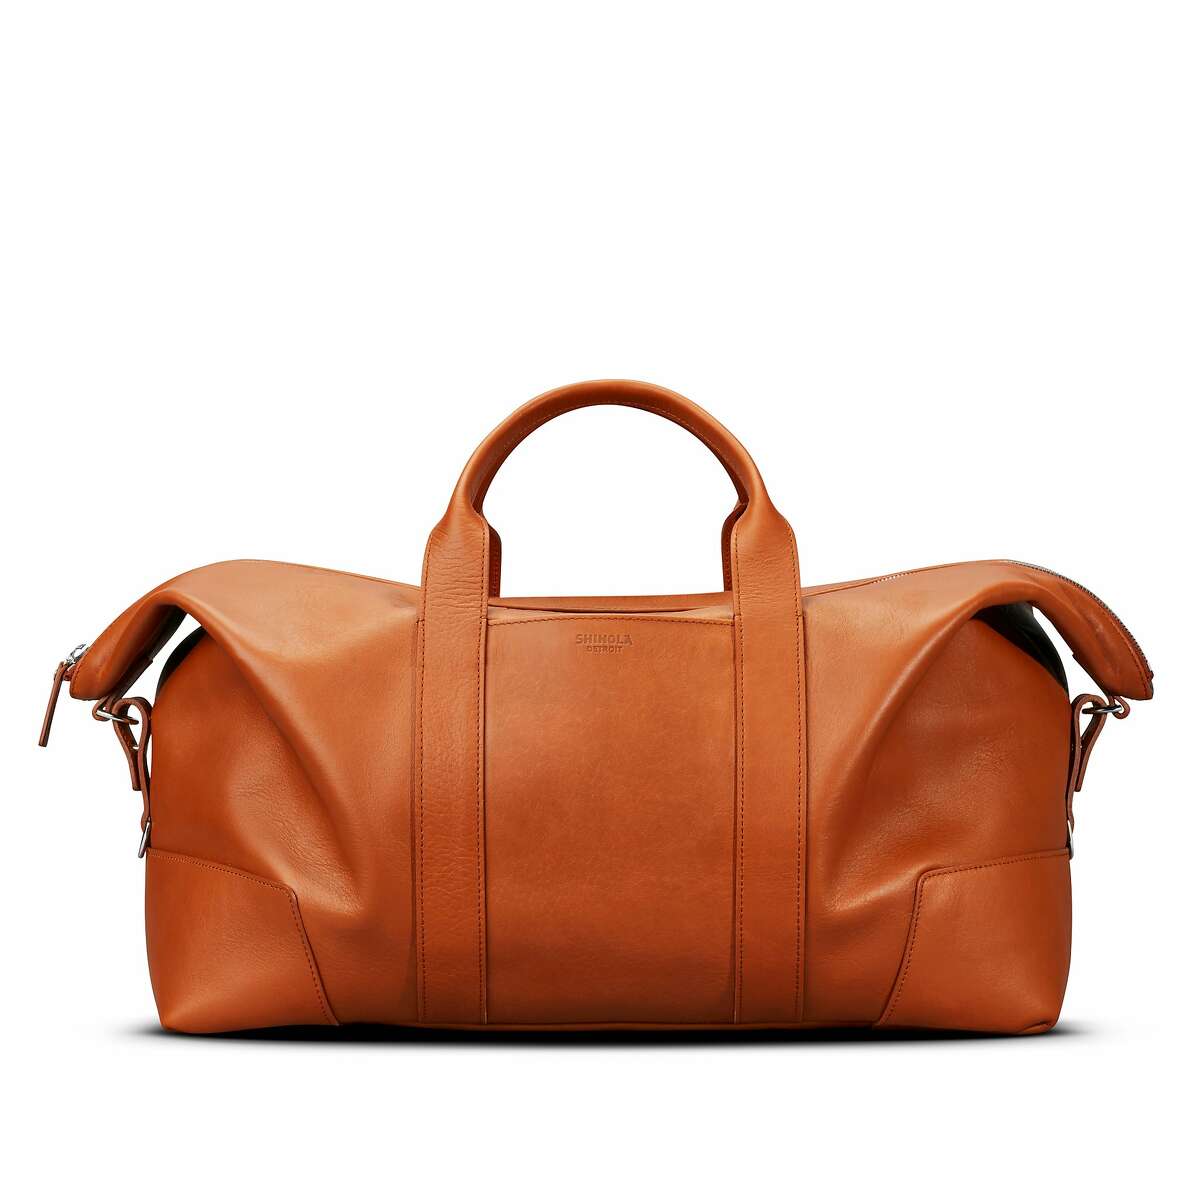 Shinola large leather carryall in bourbon. Comes in other colors. Retails for $1,295.